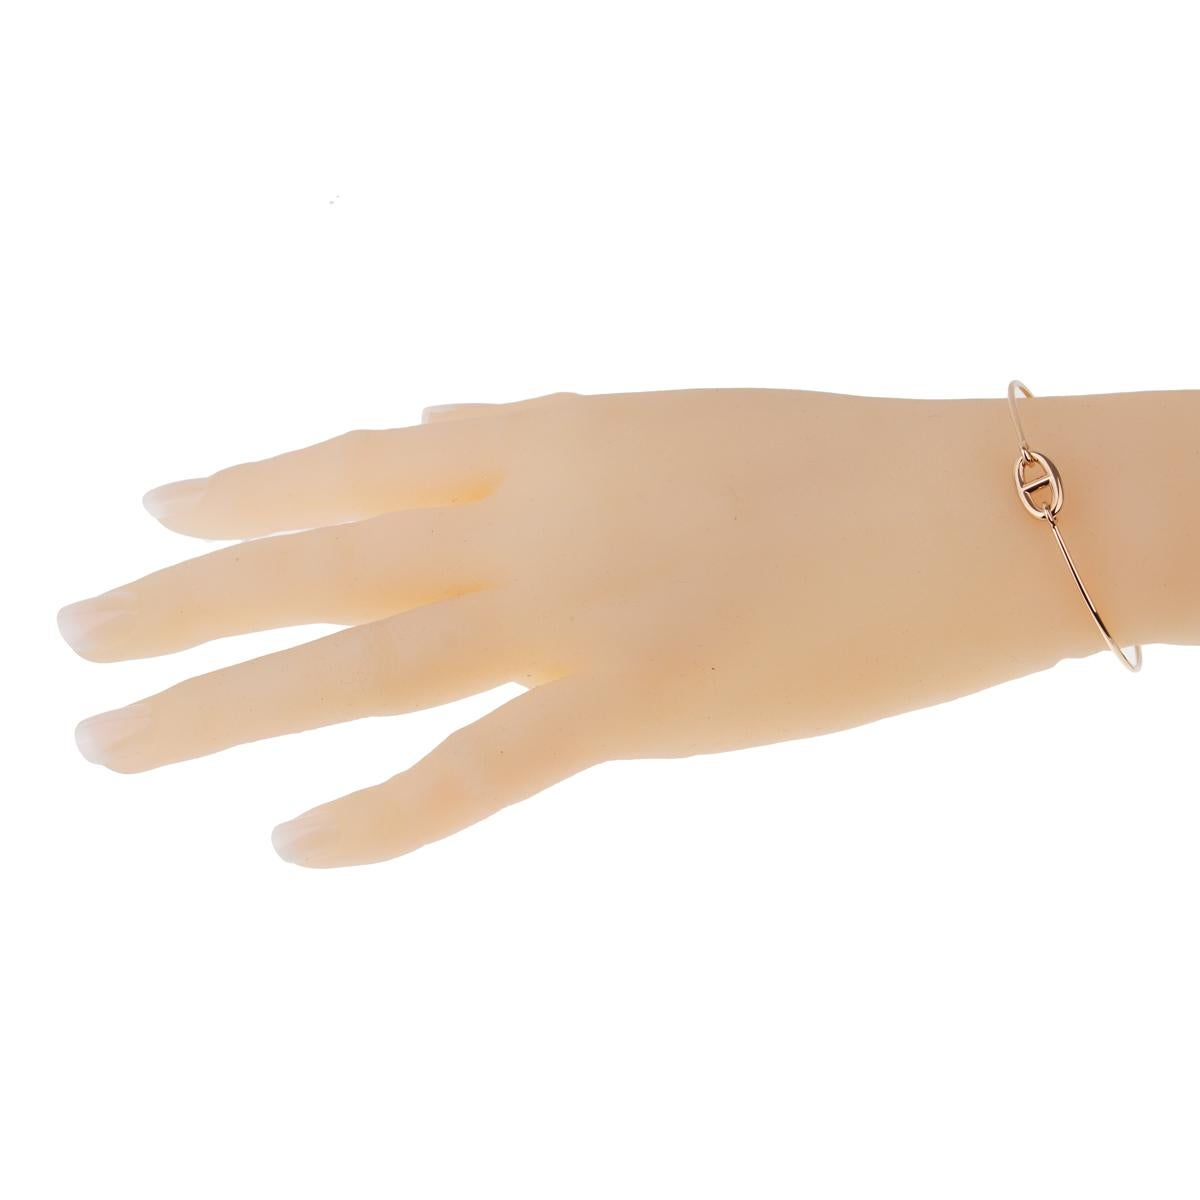 Add this fabulous Hermes Ronde rose gold bracelet to your stack. By Hermes, this round skinny bangle, elegant and simple, is made in solid 18kt rose gold. Featuring their signature Chaine d'Ancre motif.

